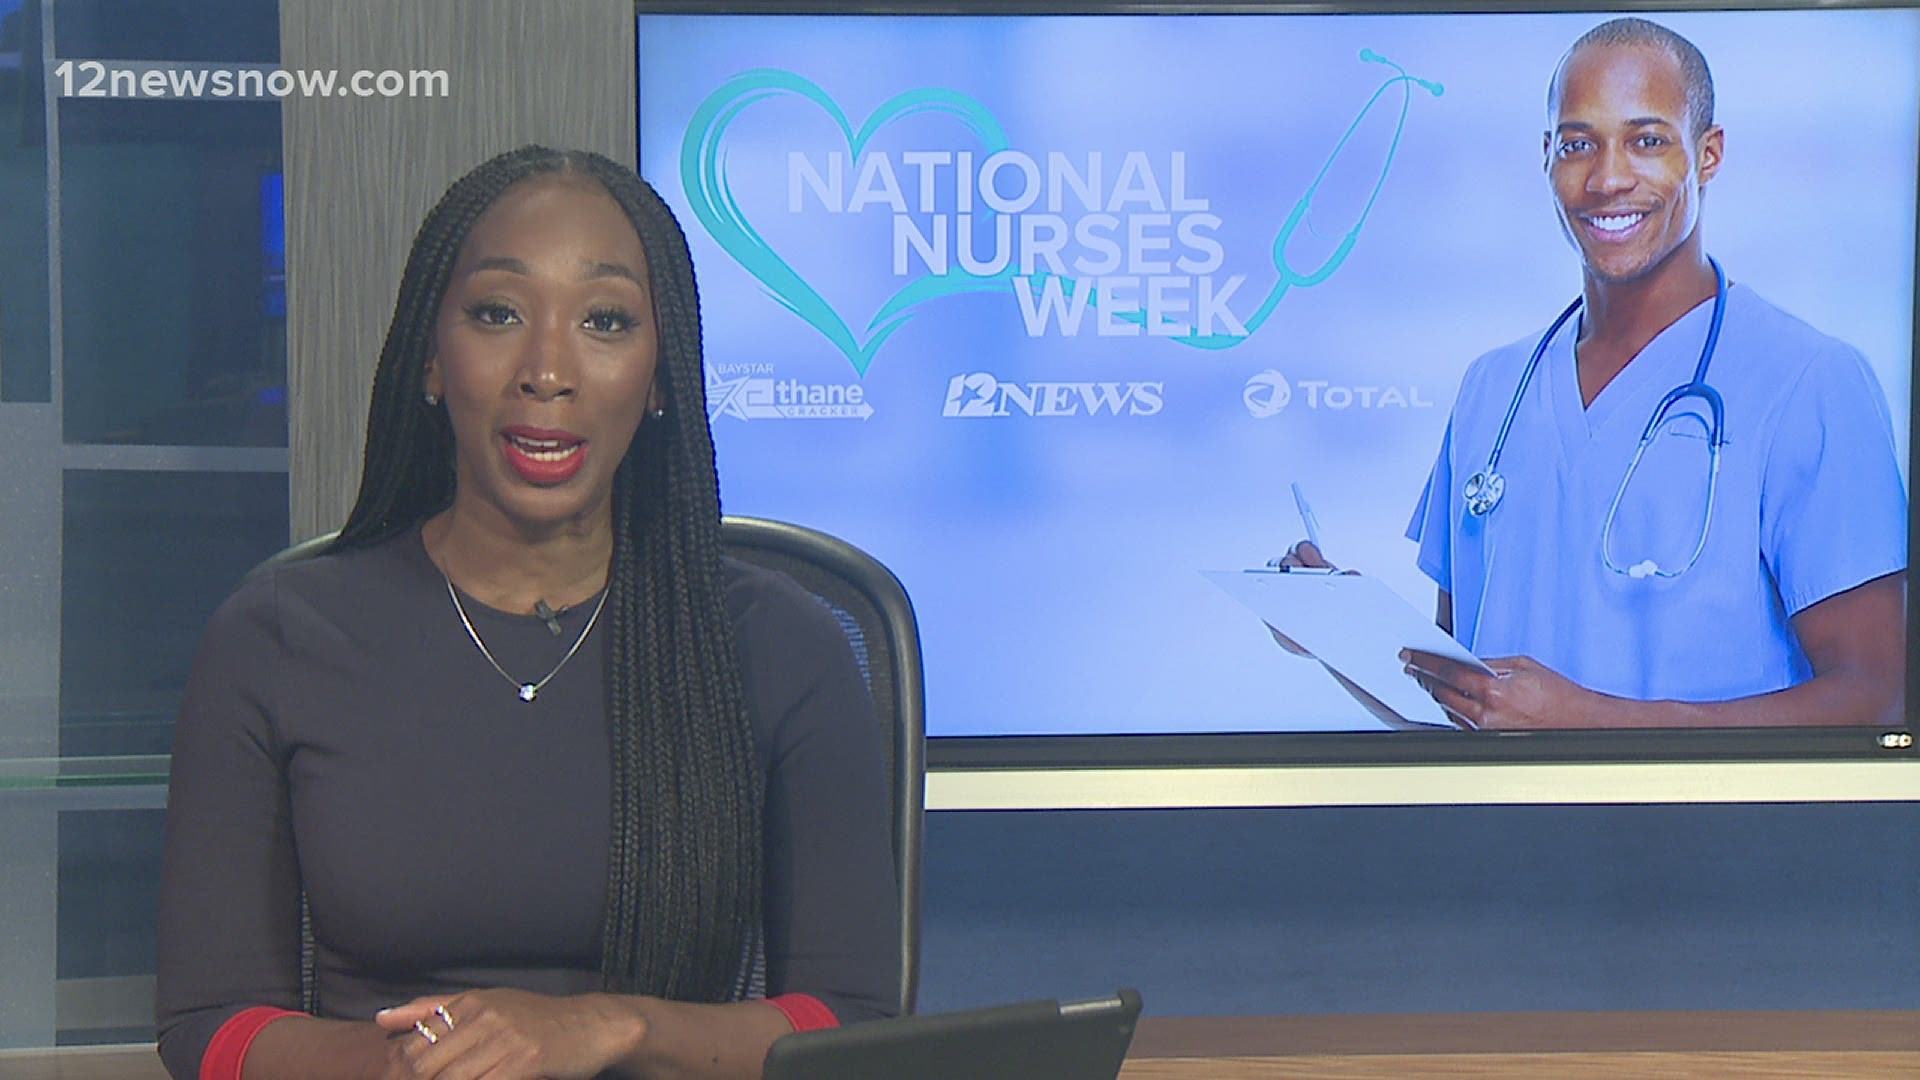 National Nurses Week begins each year on May 6 and ends on May 12 in the United States. It's all about recognizing nurses across Southeast Texas and the country.